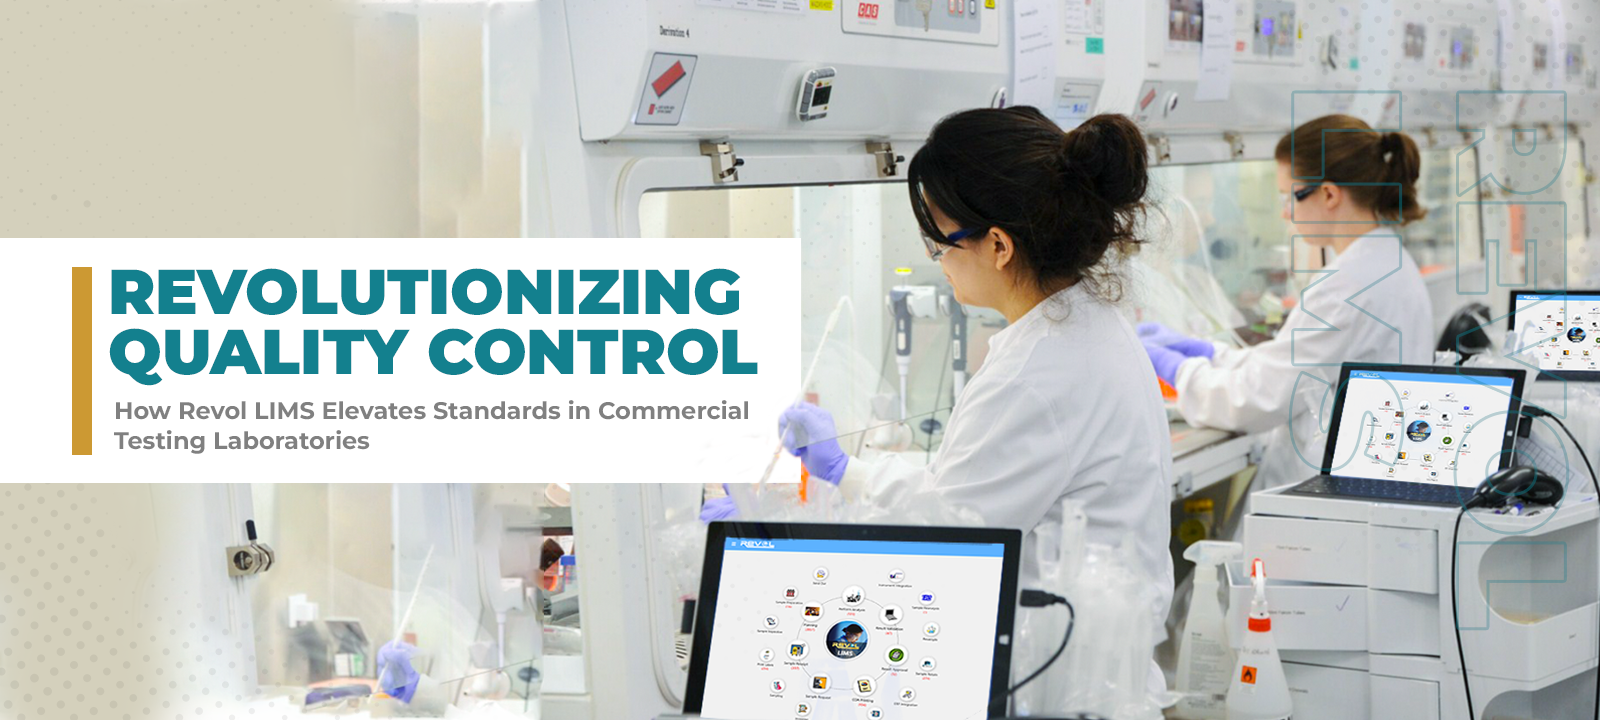 Scientists using Revol LIMS to streamline quality control procedures and improve standards in a modern commercial testing laboratory.